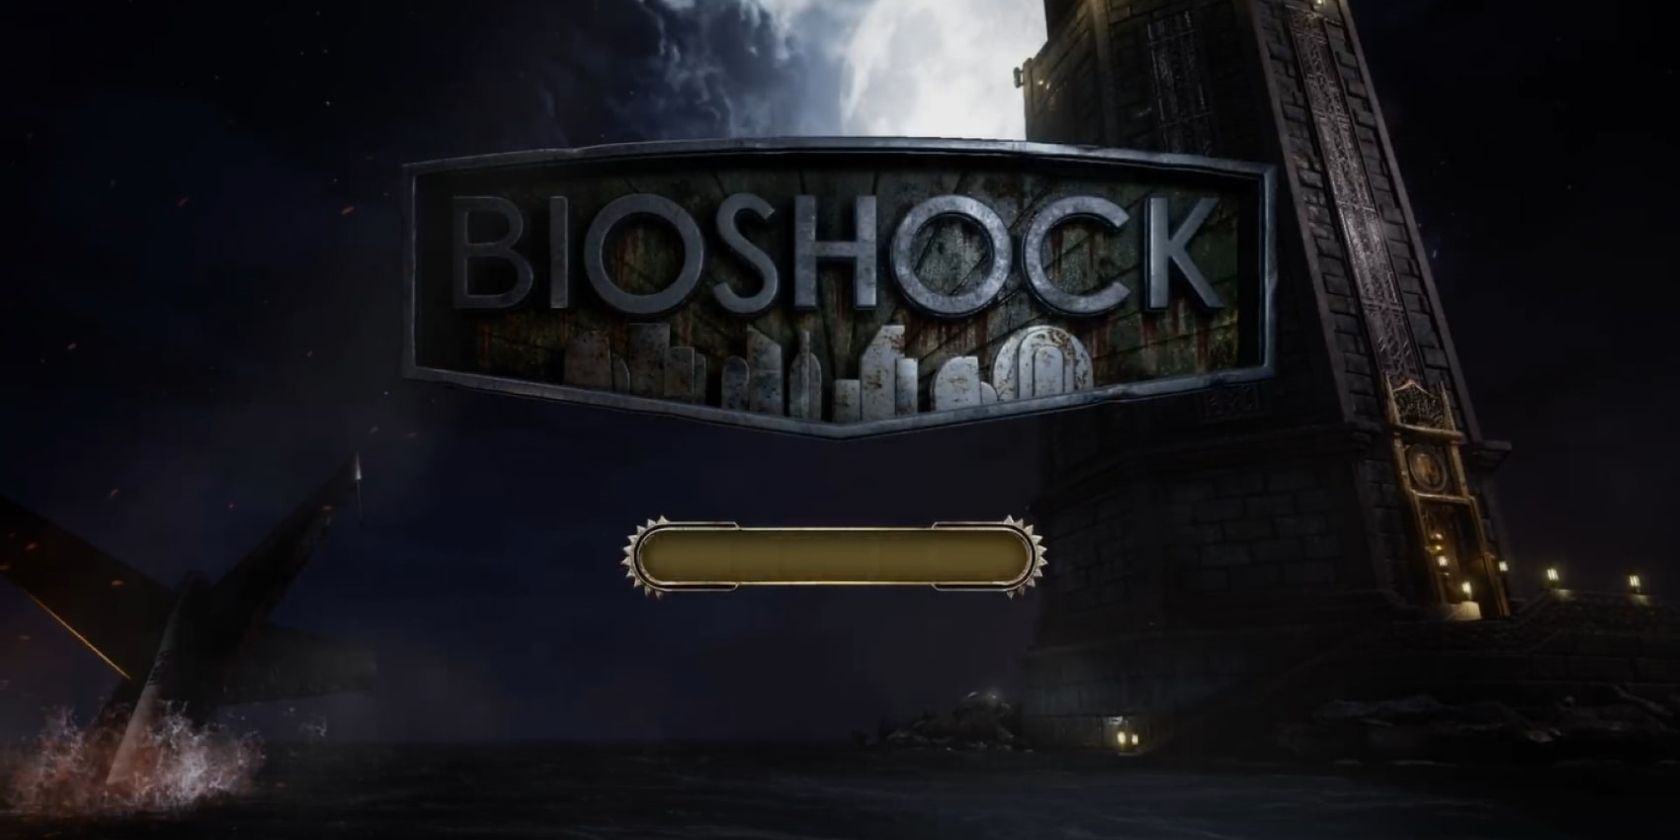 A screenshot of the title screen for Bioshock Remastered on Xbox Series X